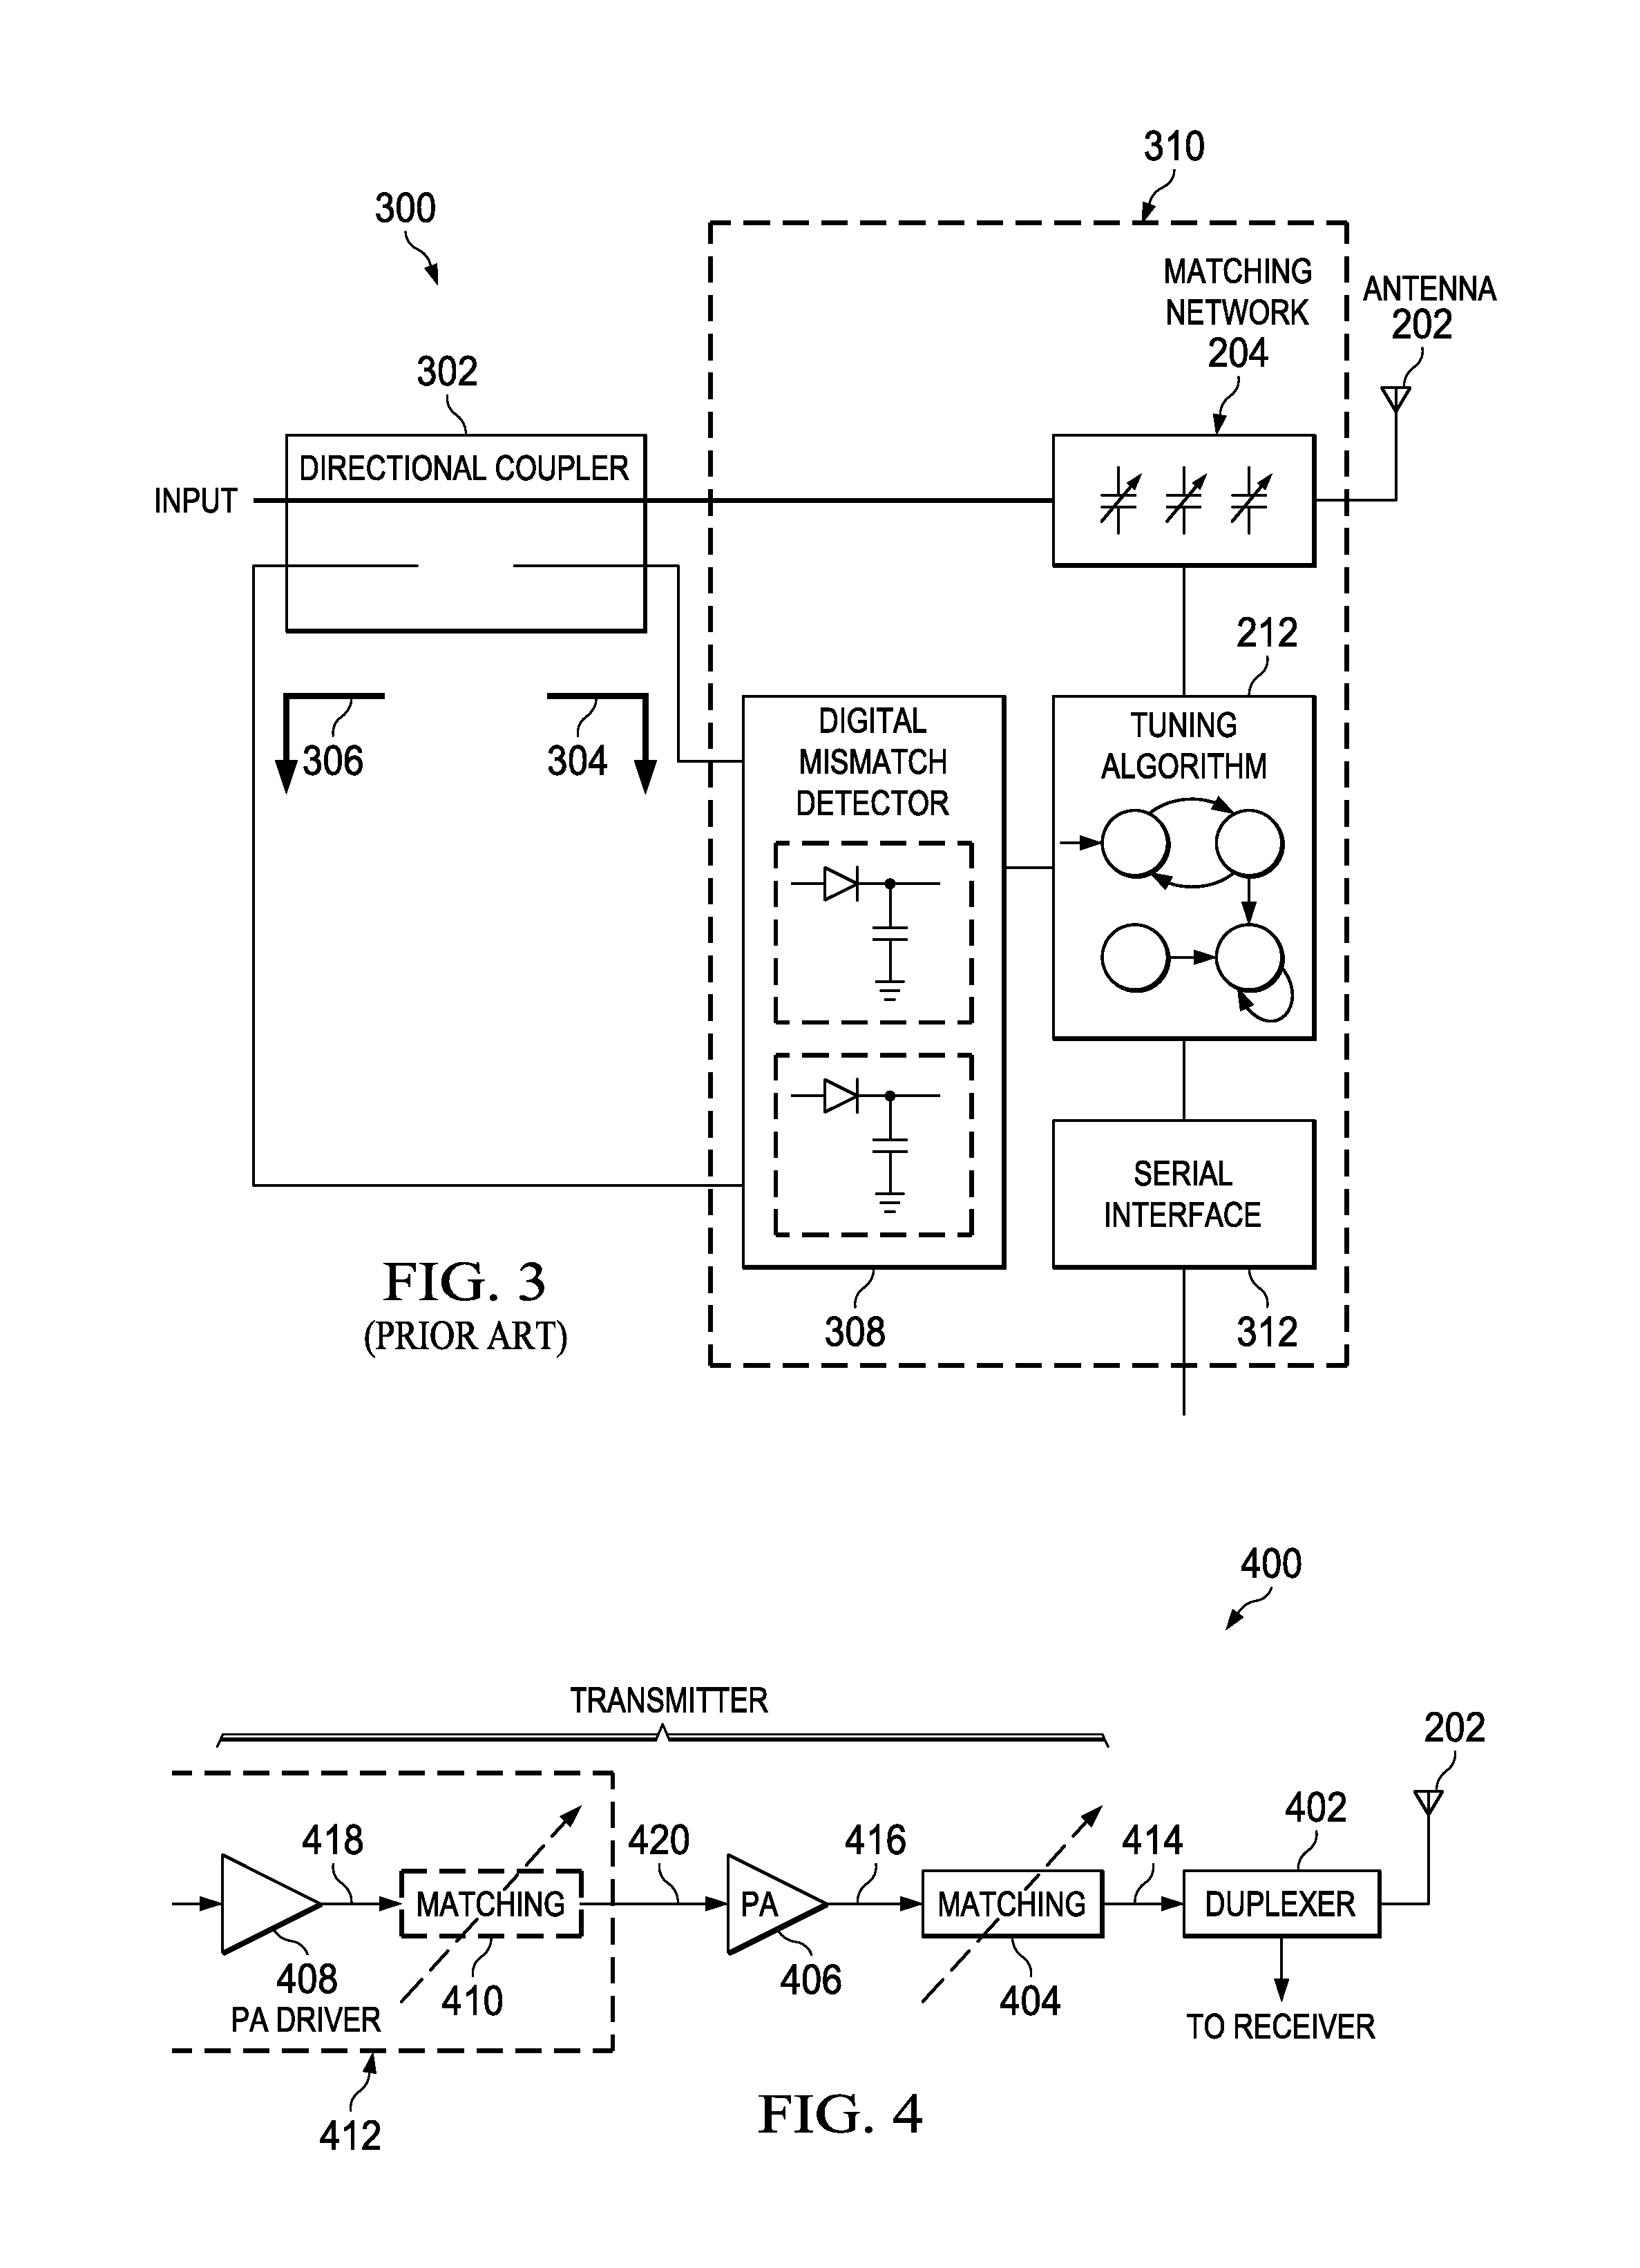 Method and apparatus for antenna tuning